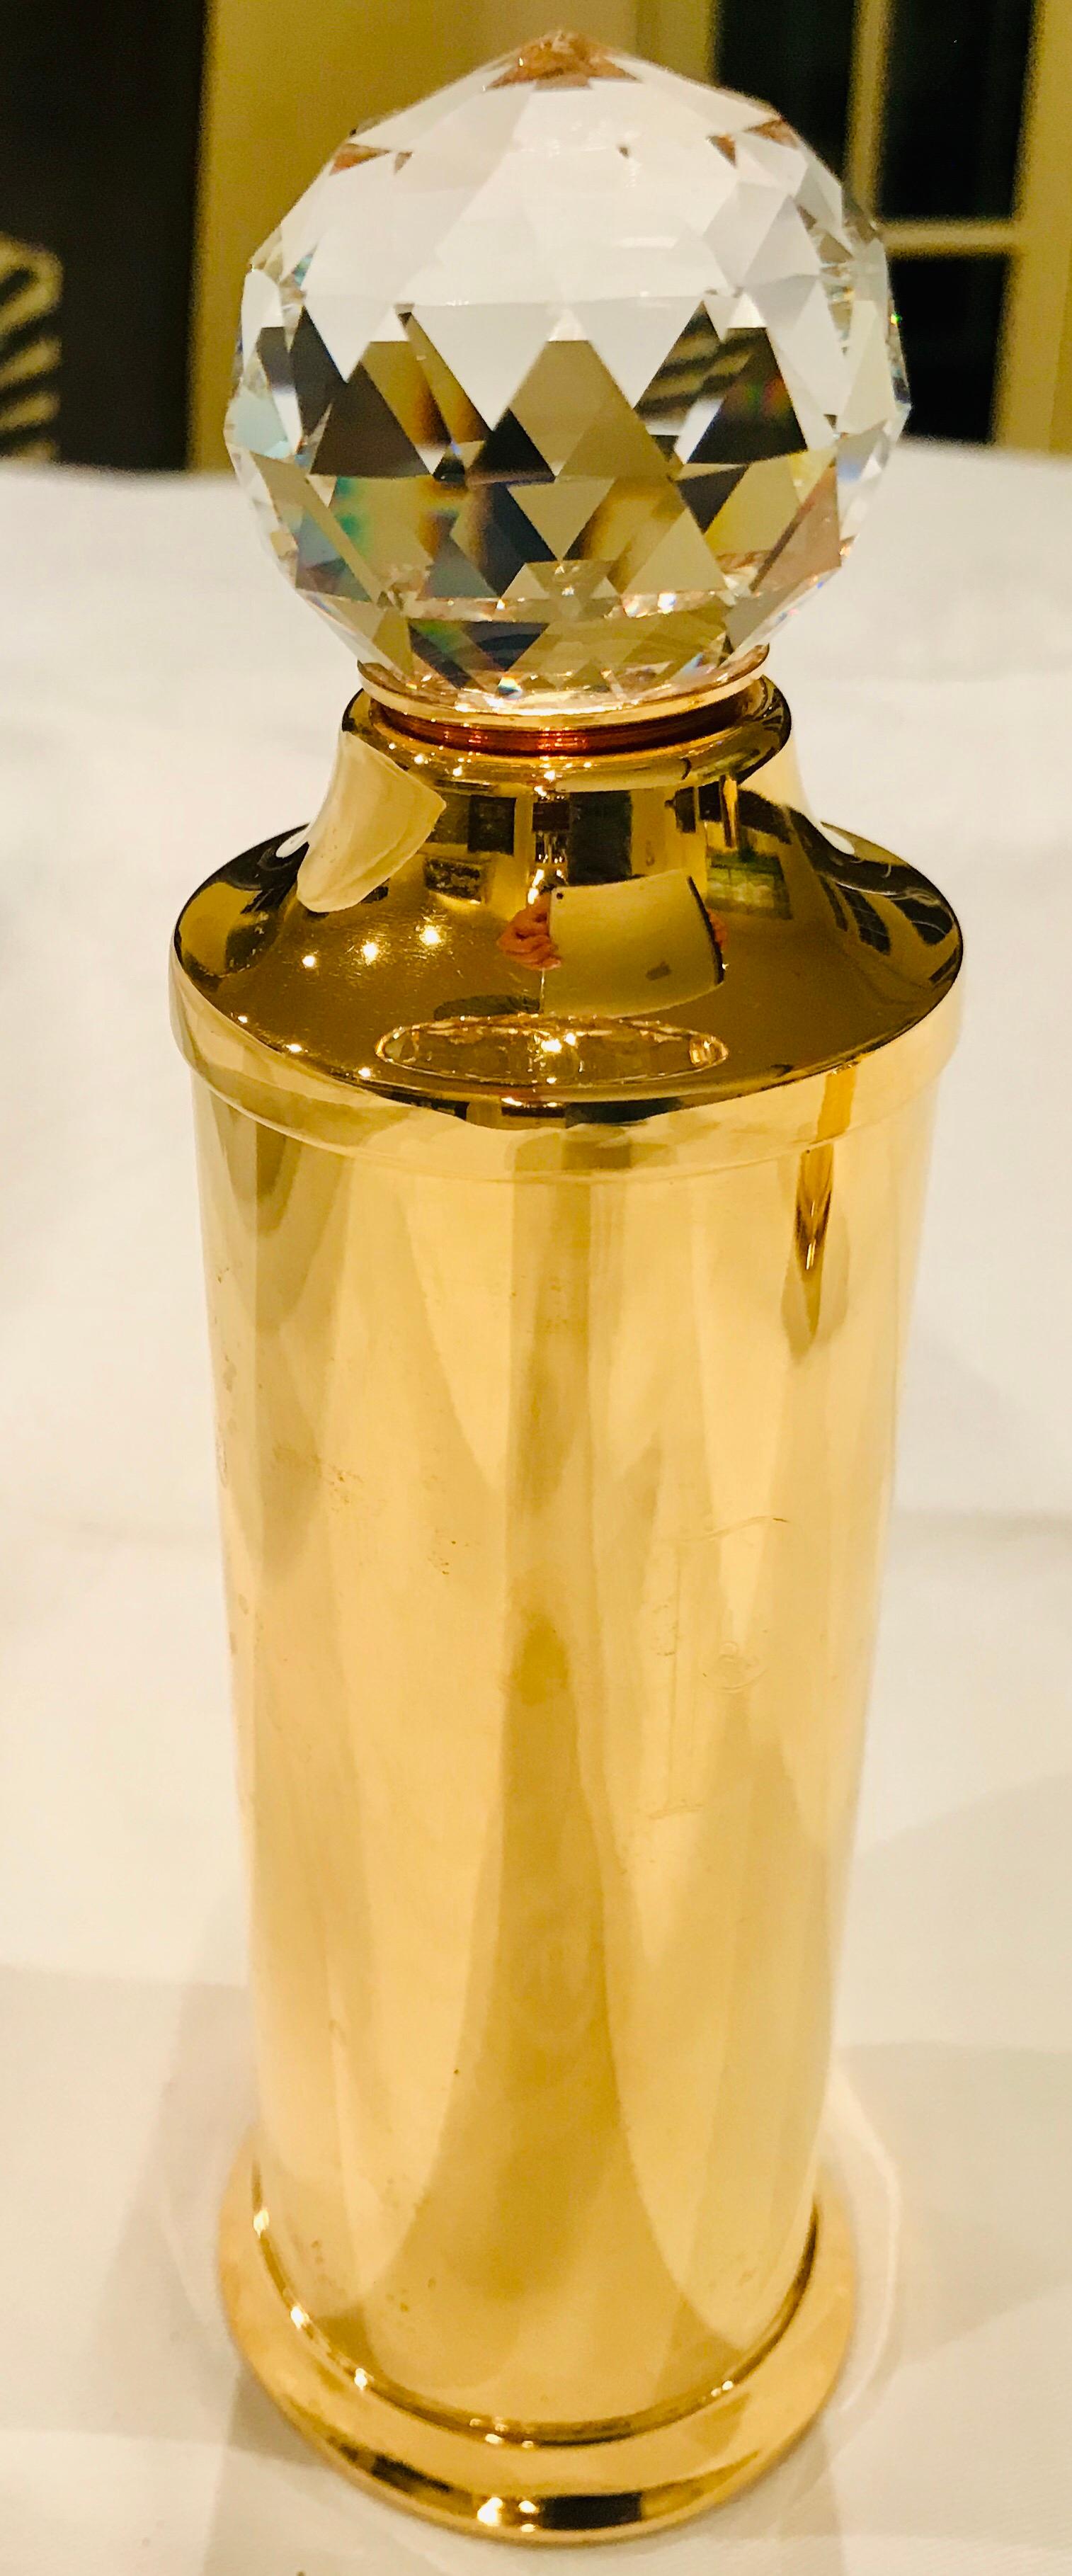 24-karat gold-plated solid brass salt shaker and pepper grinder, with large Swarovski crystals a-top each one is pure Hollywood glam. 

Pepper grinder is 7.5” high by 2.25” in diameter, where the salt shaker is 4-5/8” high by 2.25” in diameter.



 